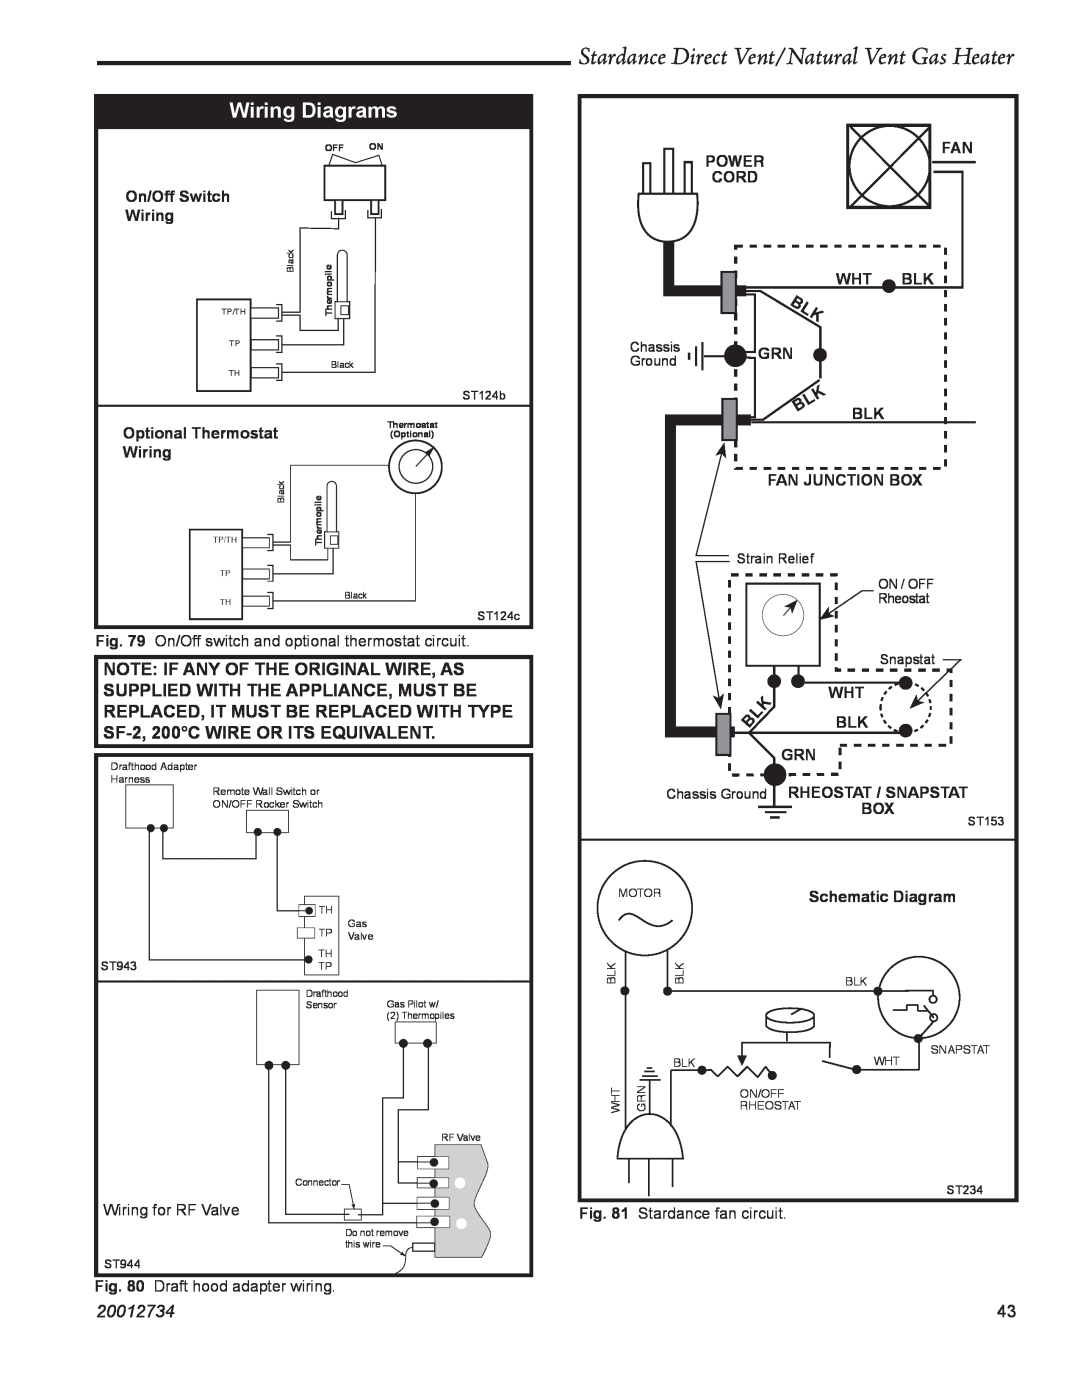 Vermont Casting SDDVT manual Wiring Diagrams, Stardance Direct Vent/Natural Vent Gas Heater, 20012734, Power 